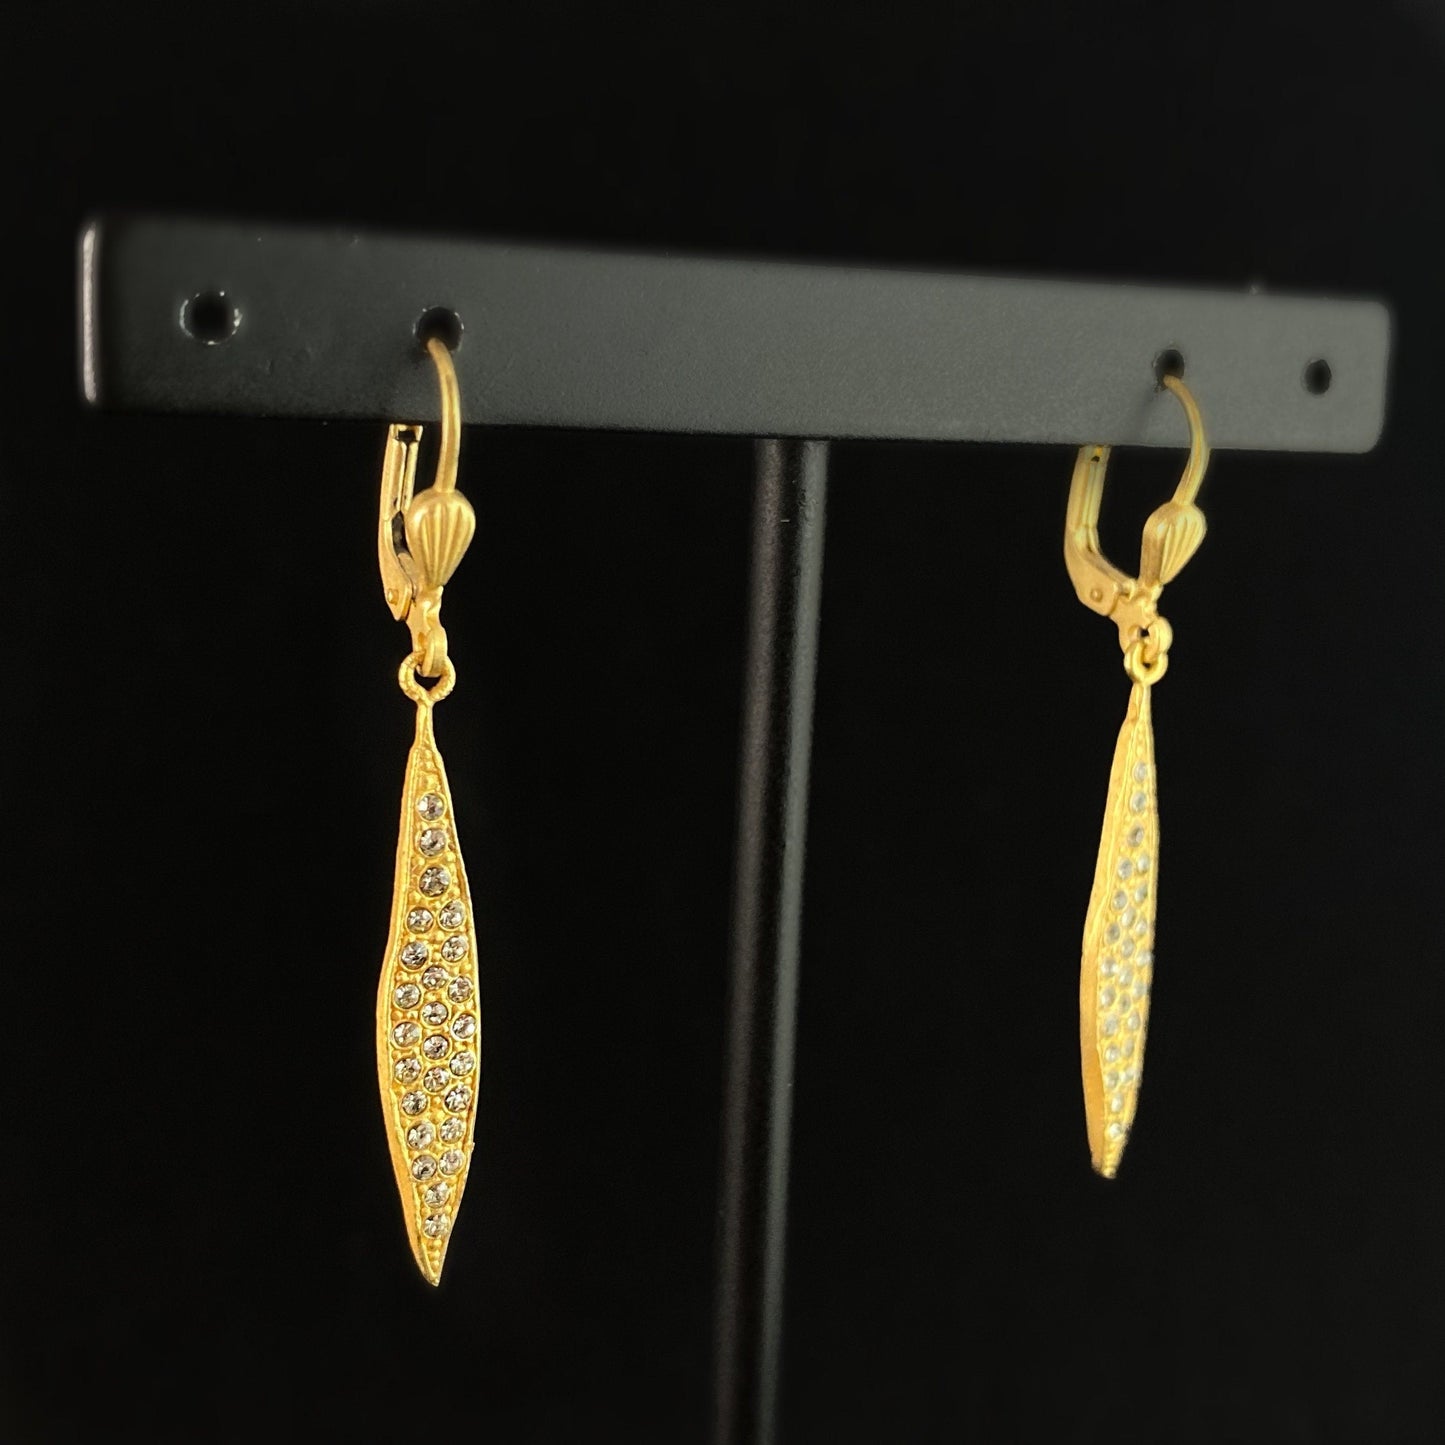 Gold Spear Drop Earrings with Clear Swarovski Crystals - La Vie Parisienne by Catherine Popesco